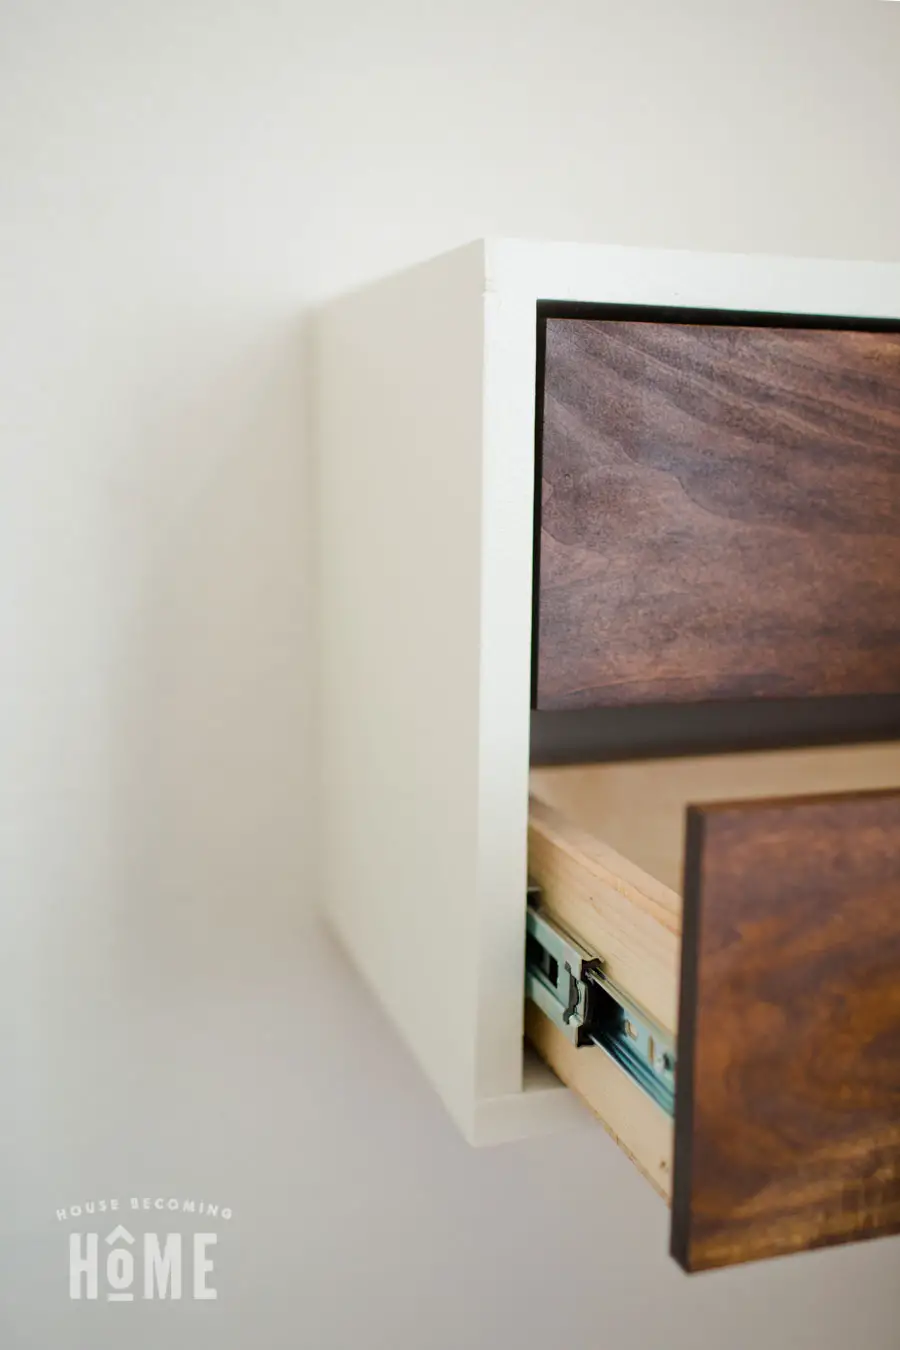 How to Build a Simple DIY Floating Nightstand with Drawers. Includes free printable pdf plans.